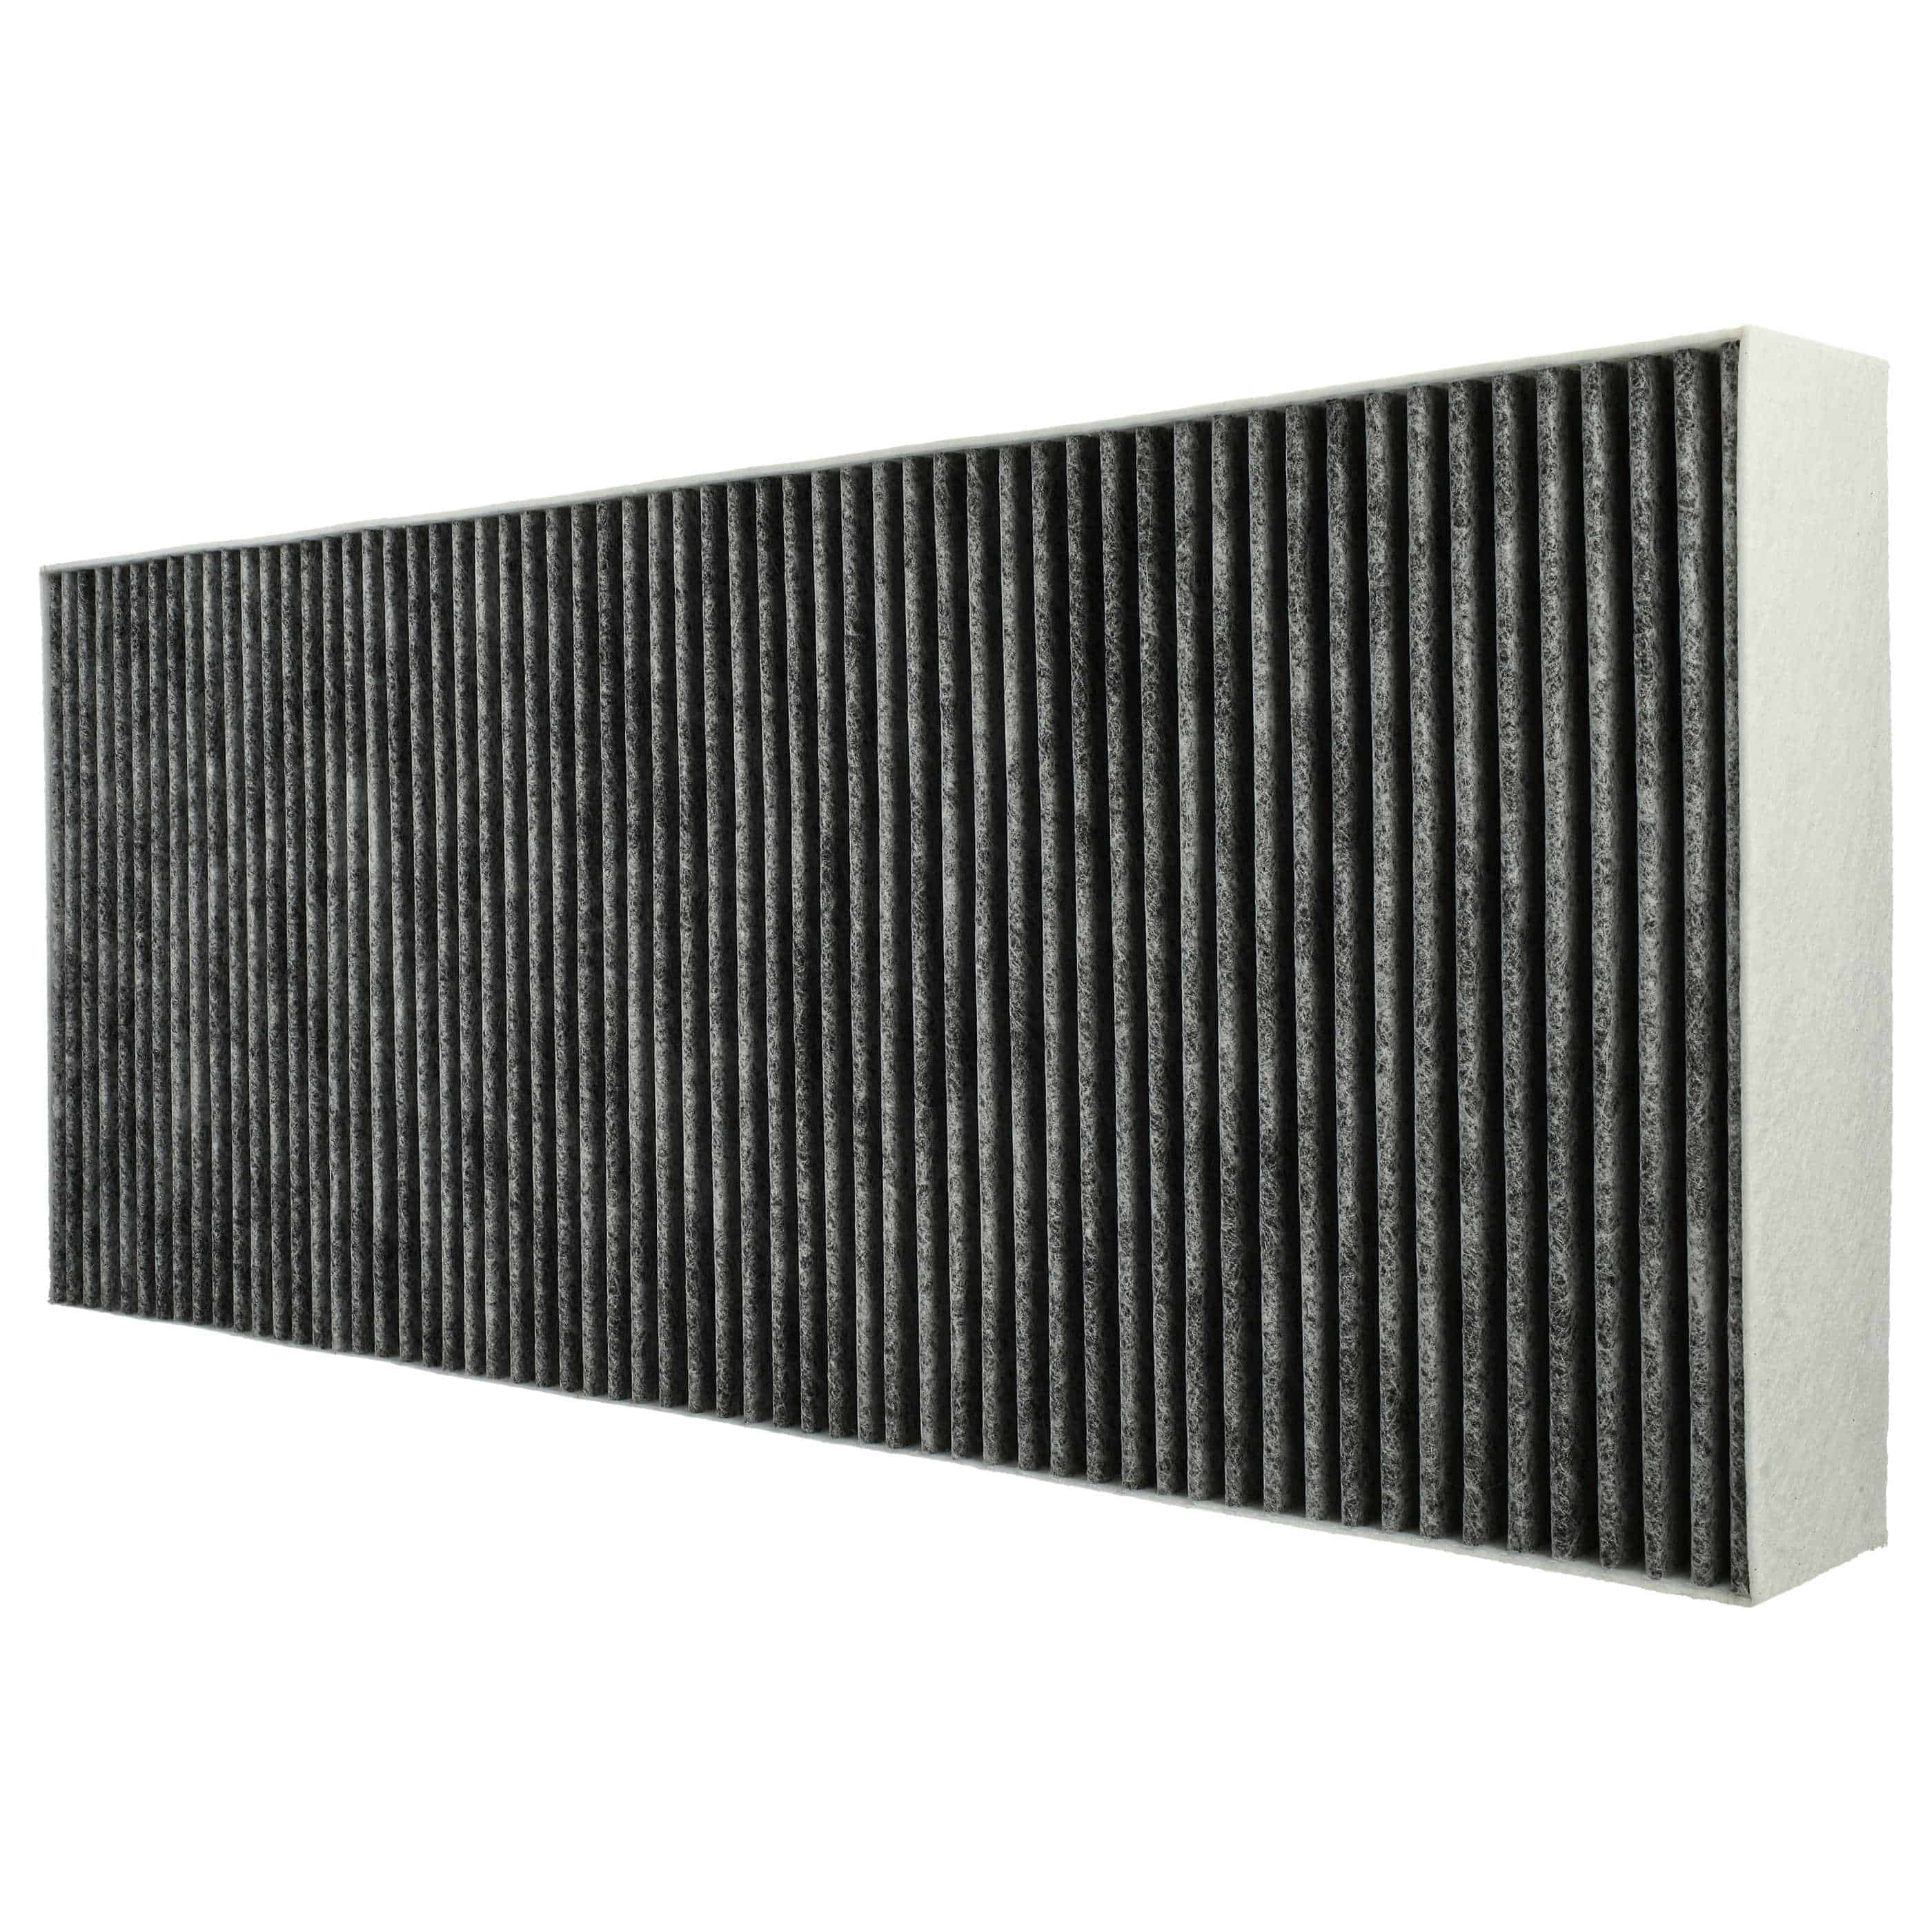 Activated Carbon Filter as Replacement for 11010506, 11018621 for Bosch Hob etc. - 46 x 19.1 x 5 cm